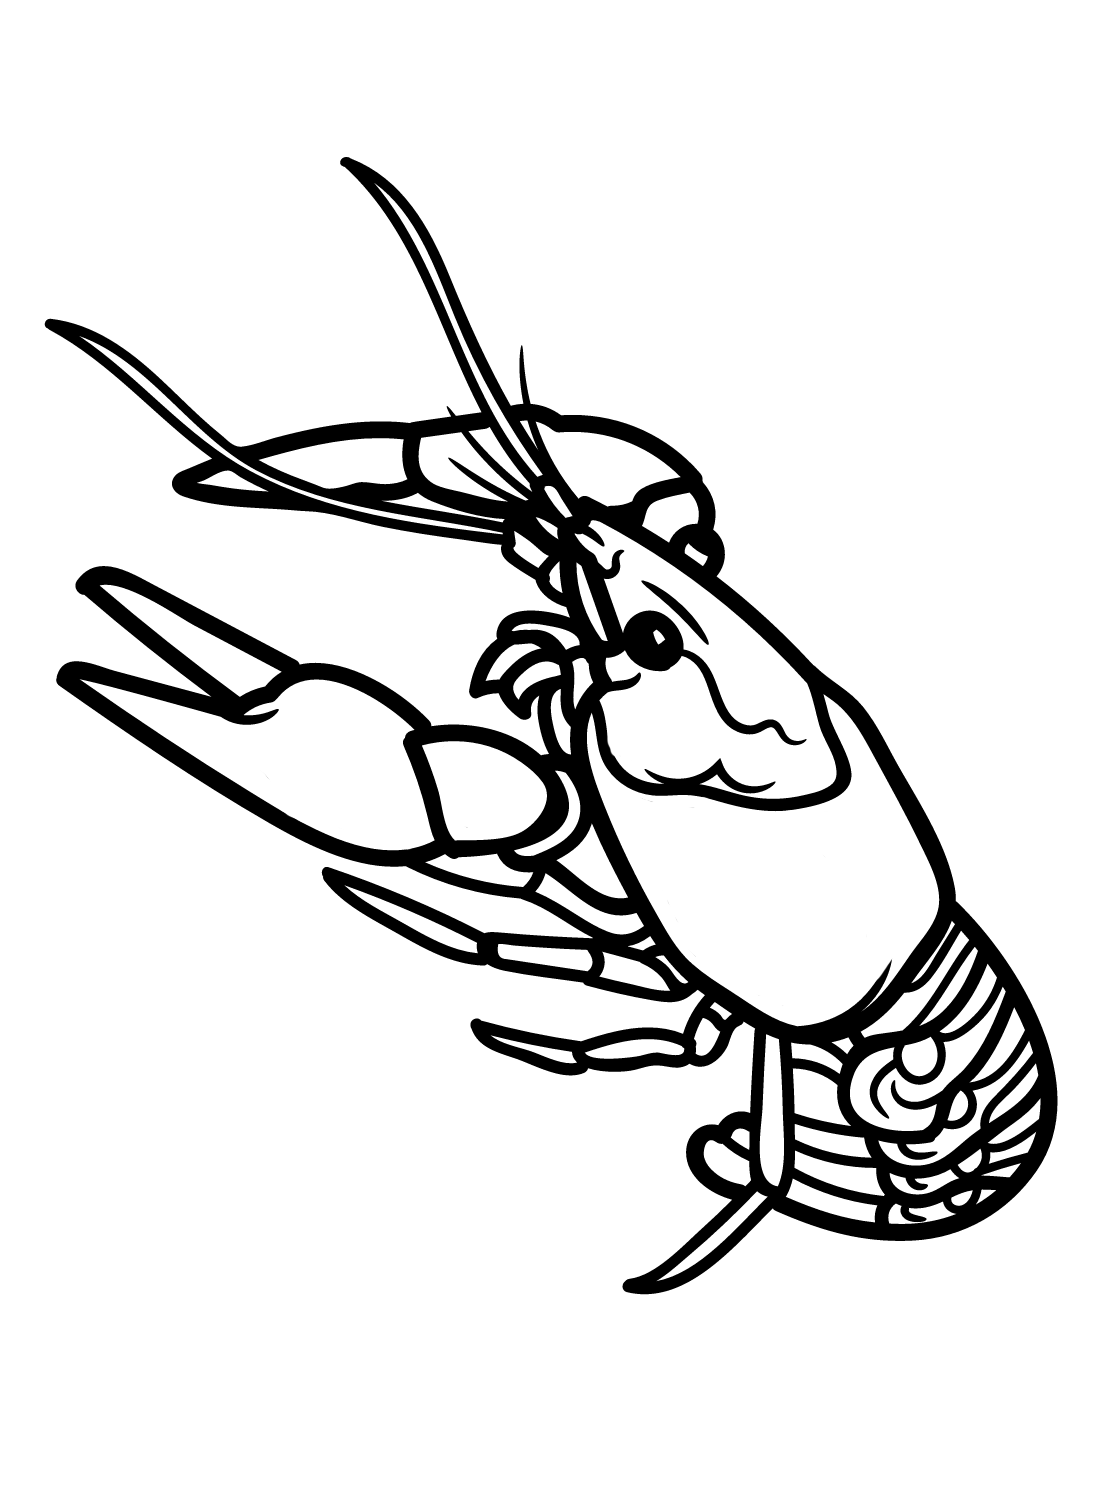 Images Crawfish Coloring Page